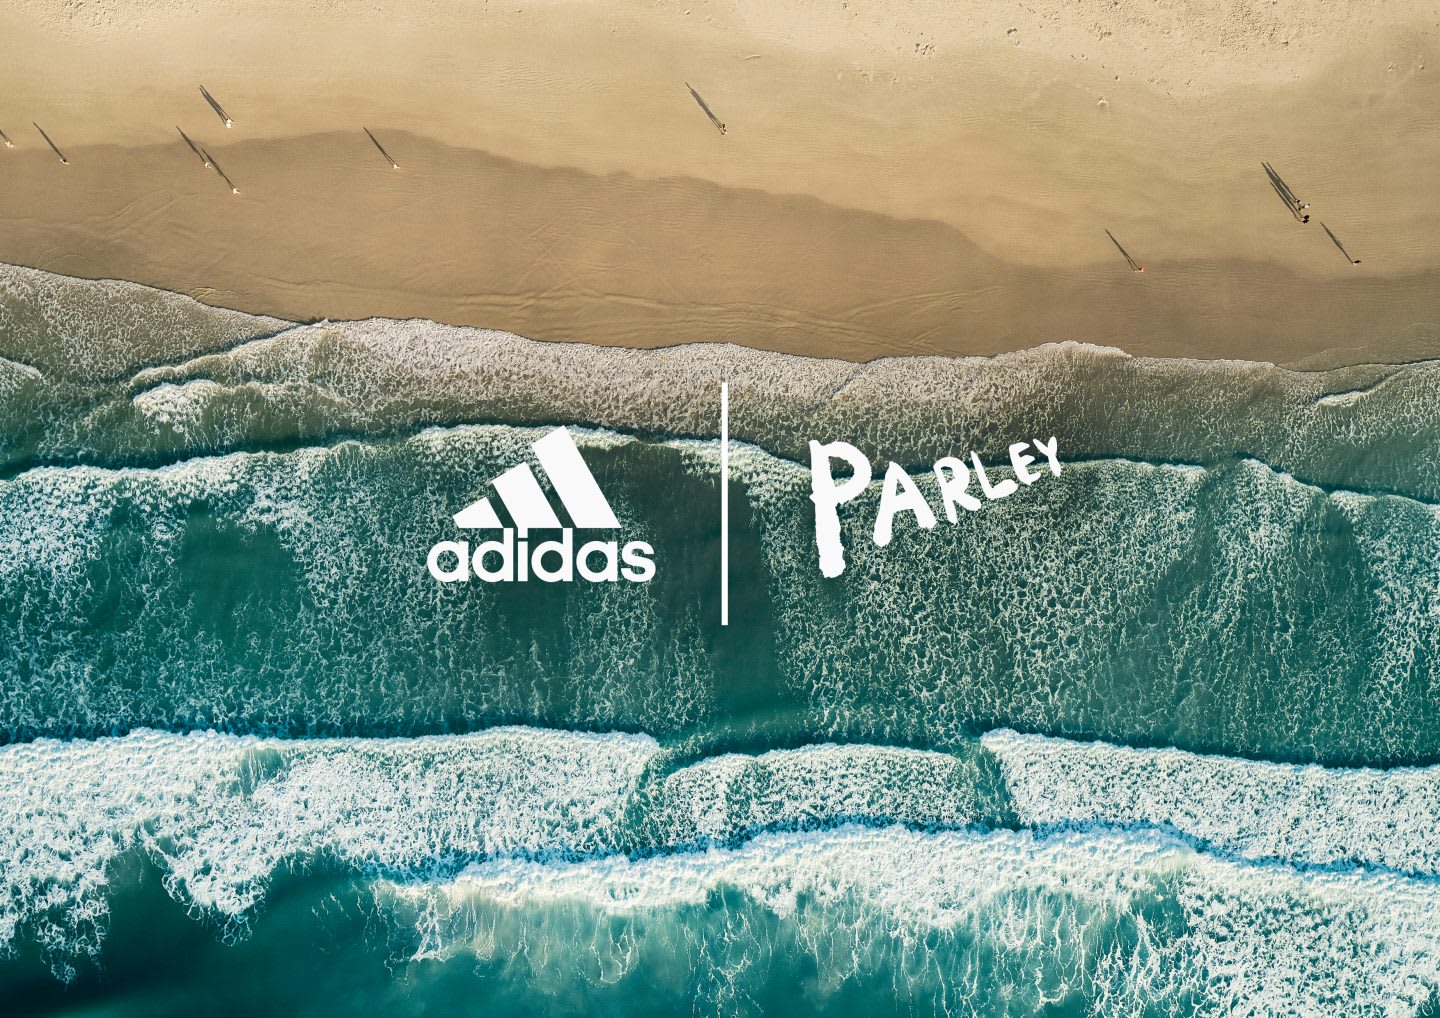 adidas x Parley – Turning Marine Plastic Pollution into Sustainable ...